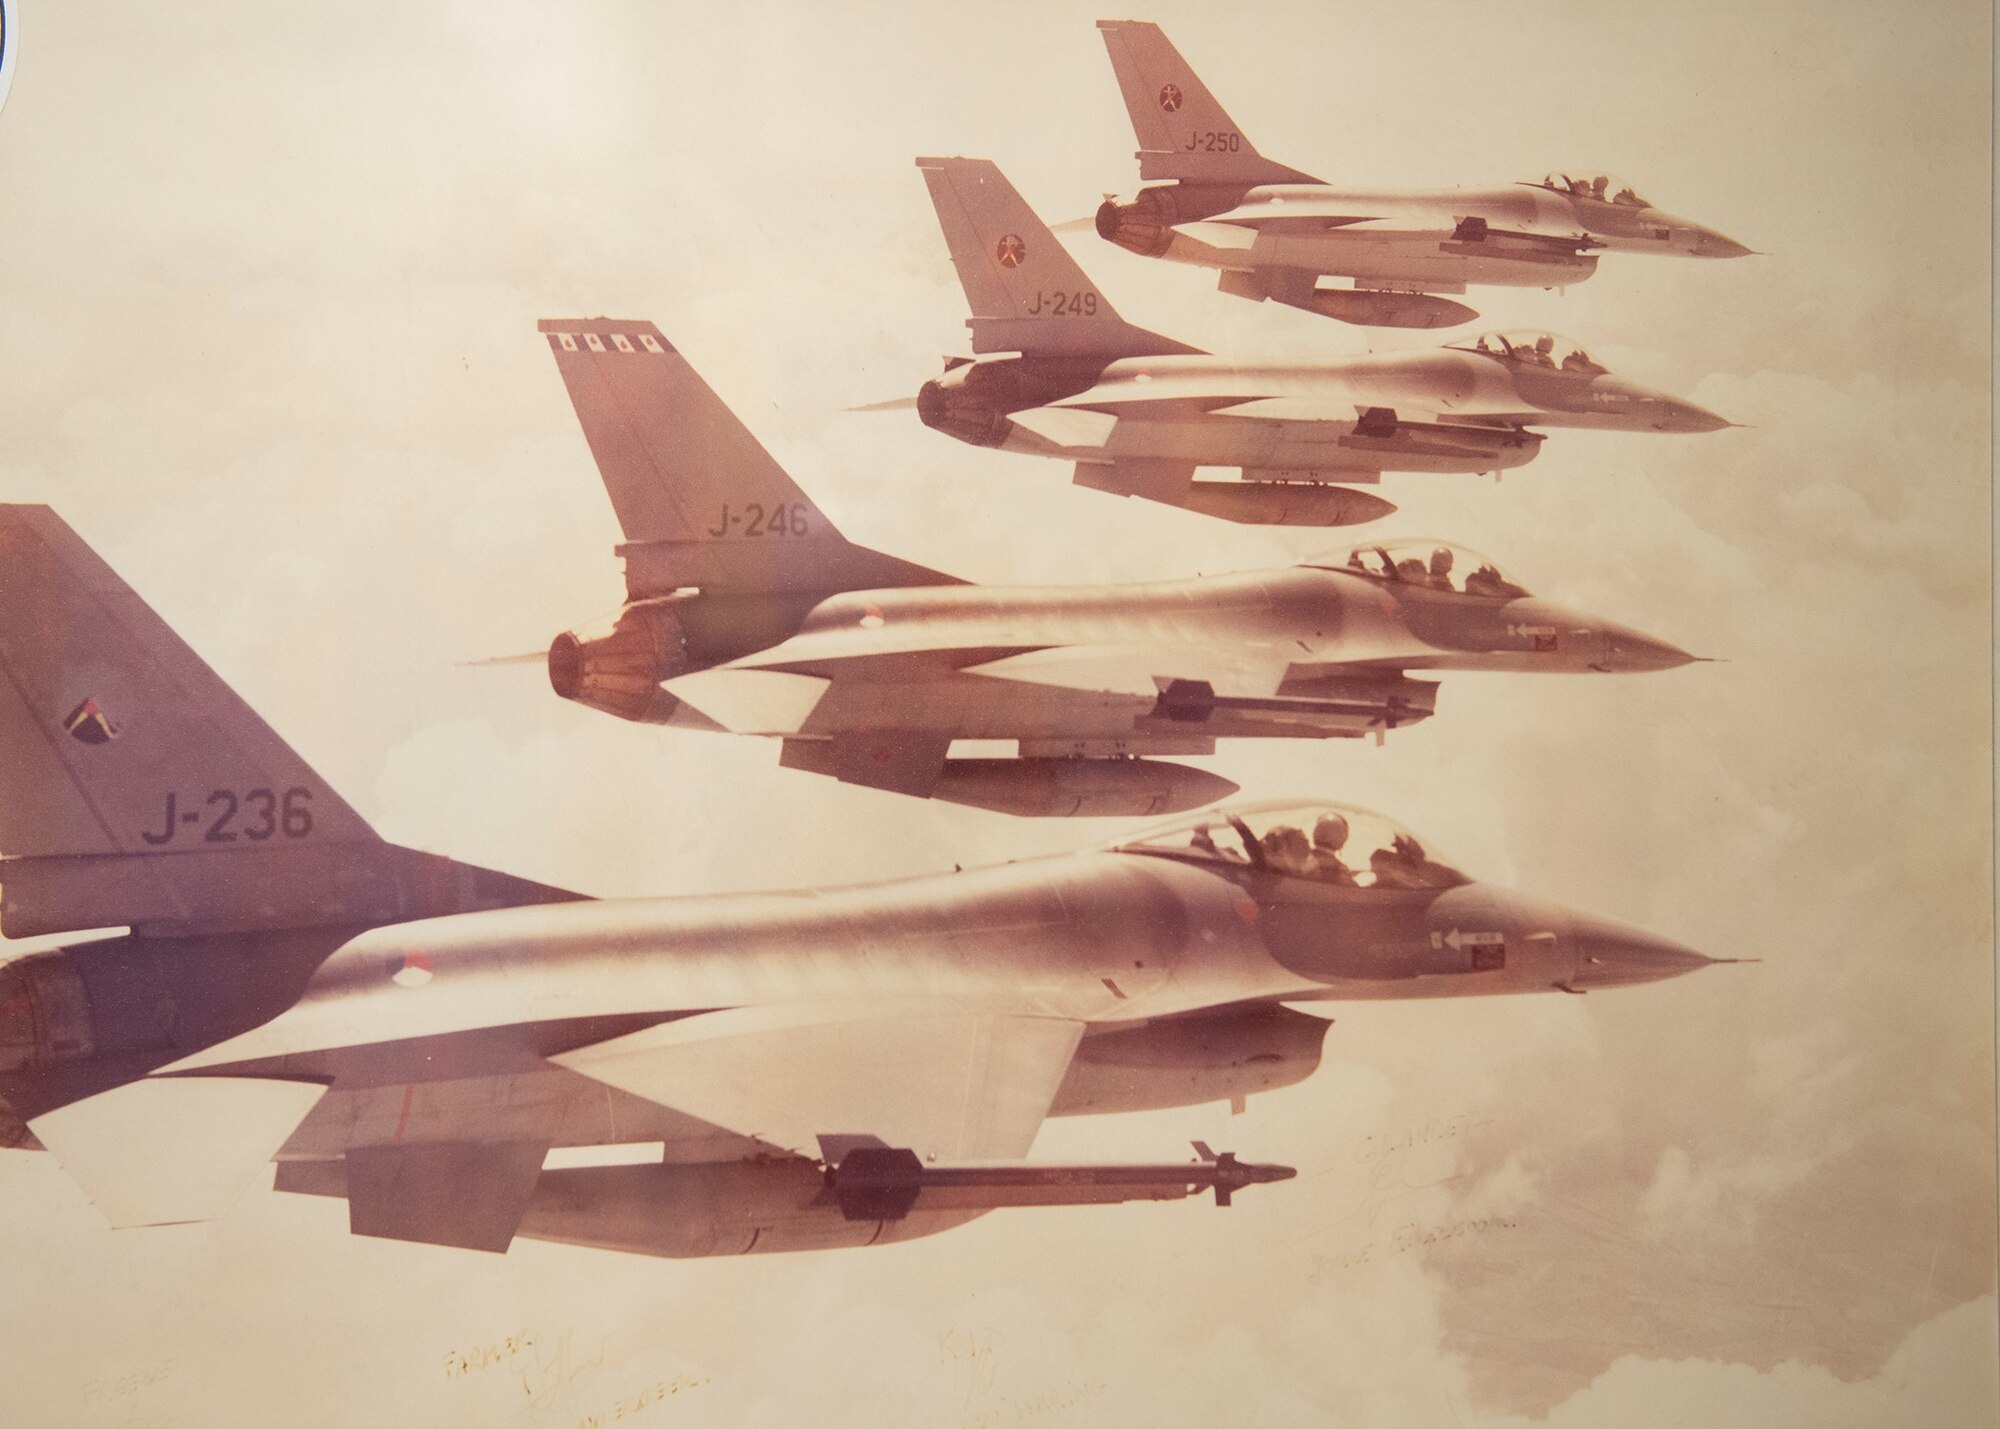 Four F-16s fly in formation.